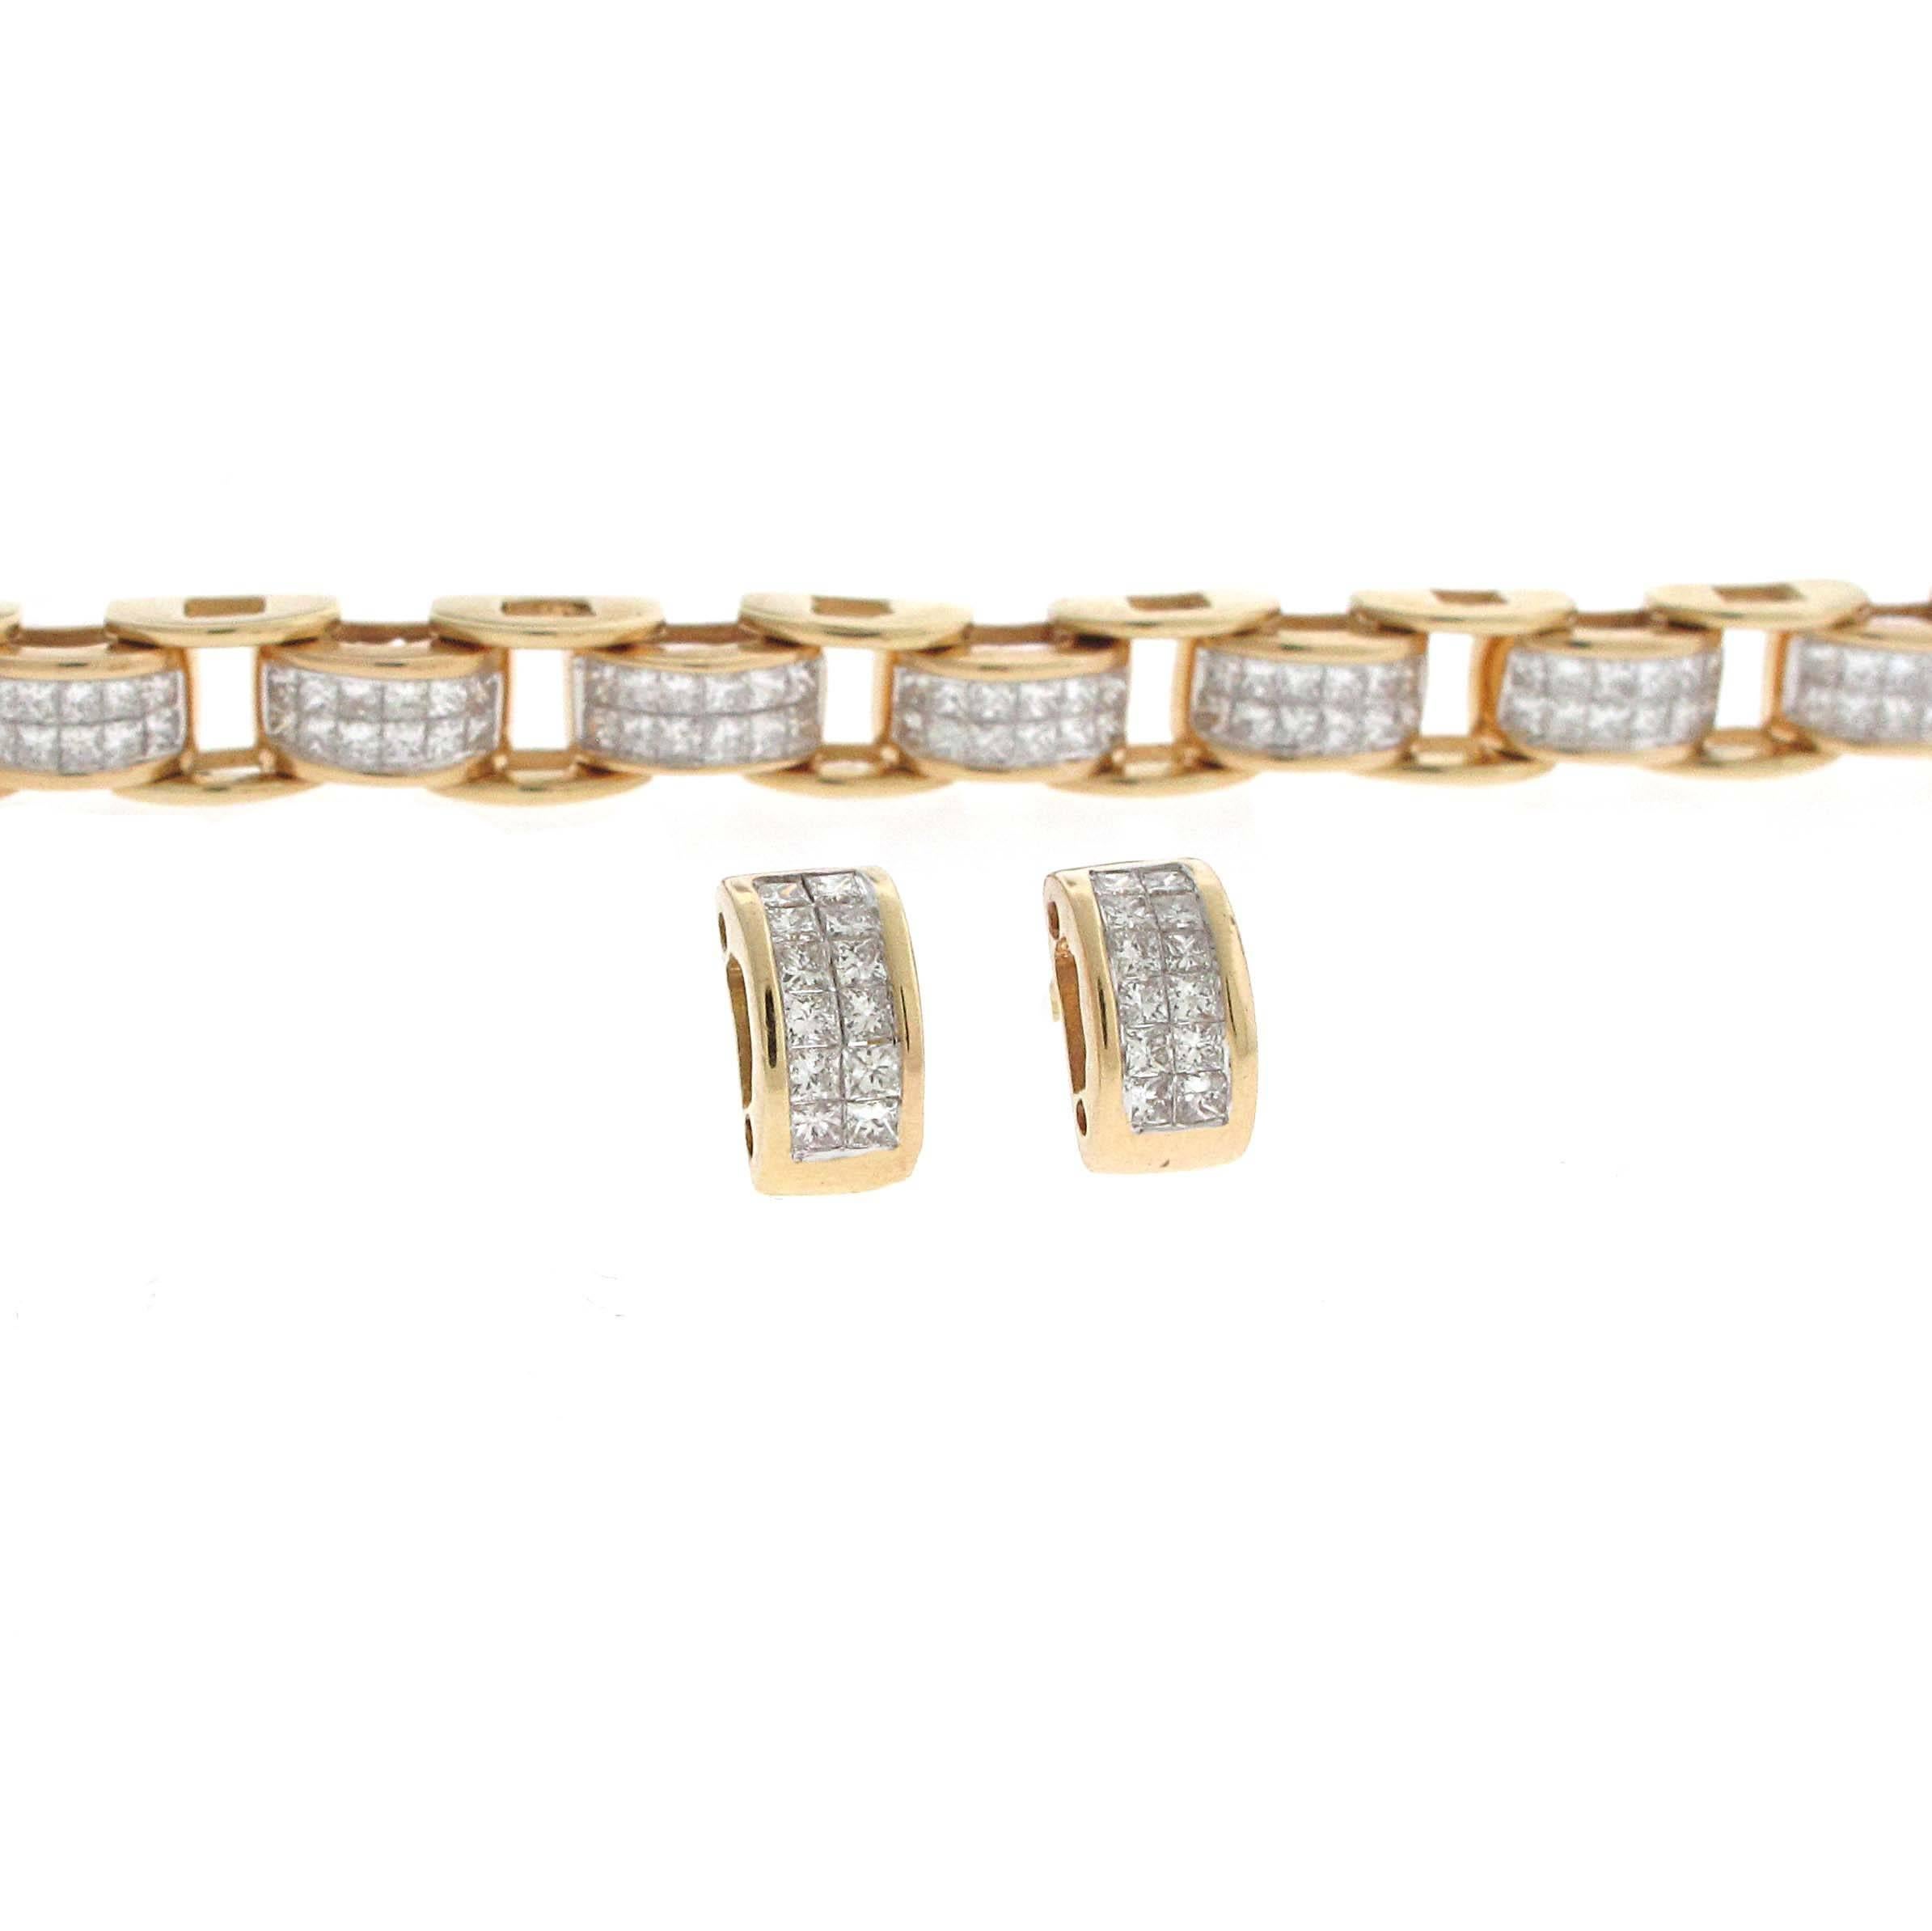 A great matching set for a gift or for yourself. Very well make 14k yellow gold princess cut diamond bracelet and earrings set. The bracelet measures a standard sized wrist and locks into itself which creates a smoother look. The set has about 6